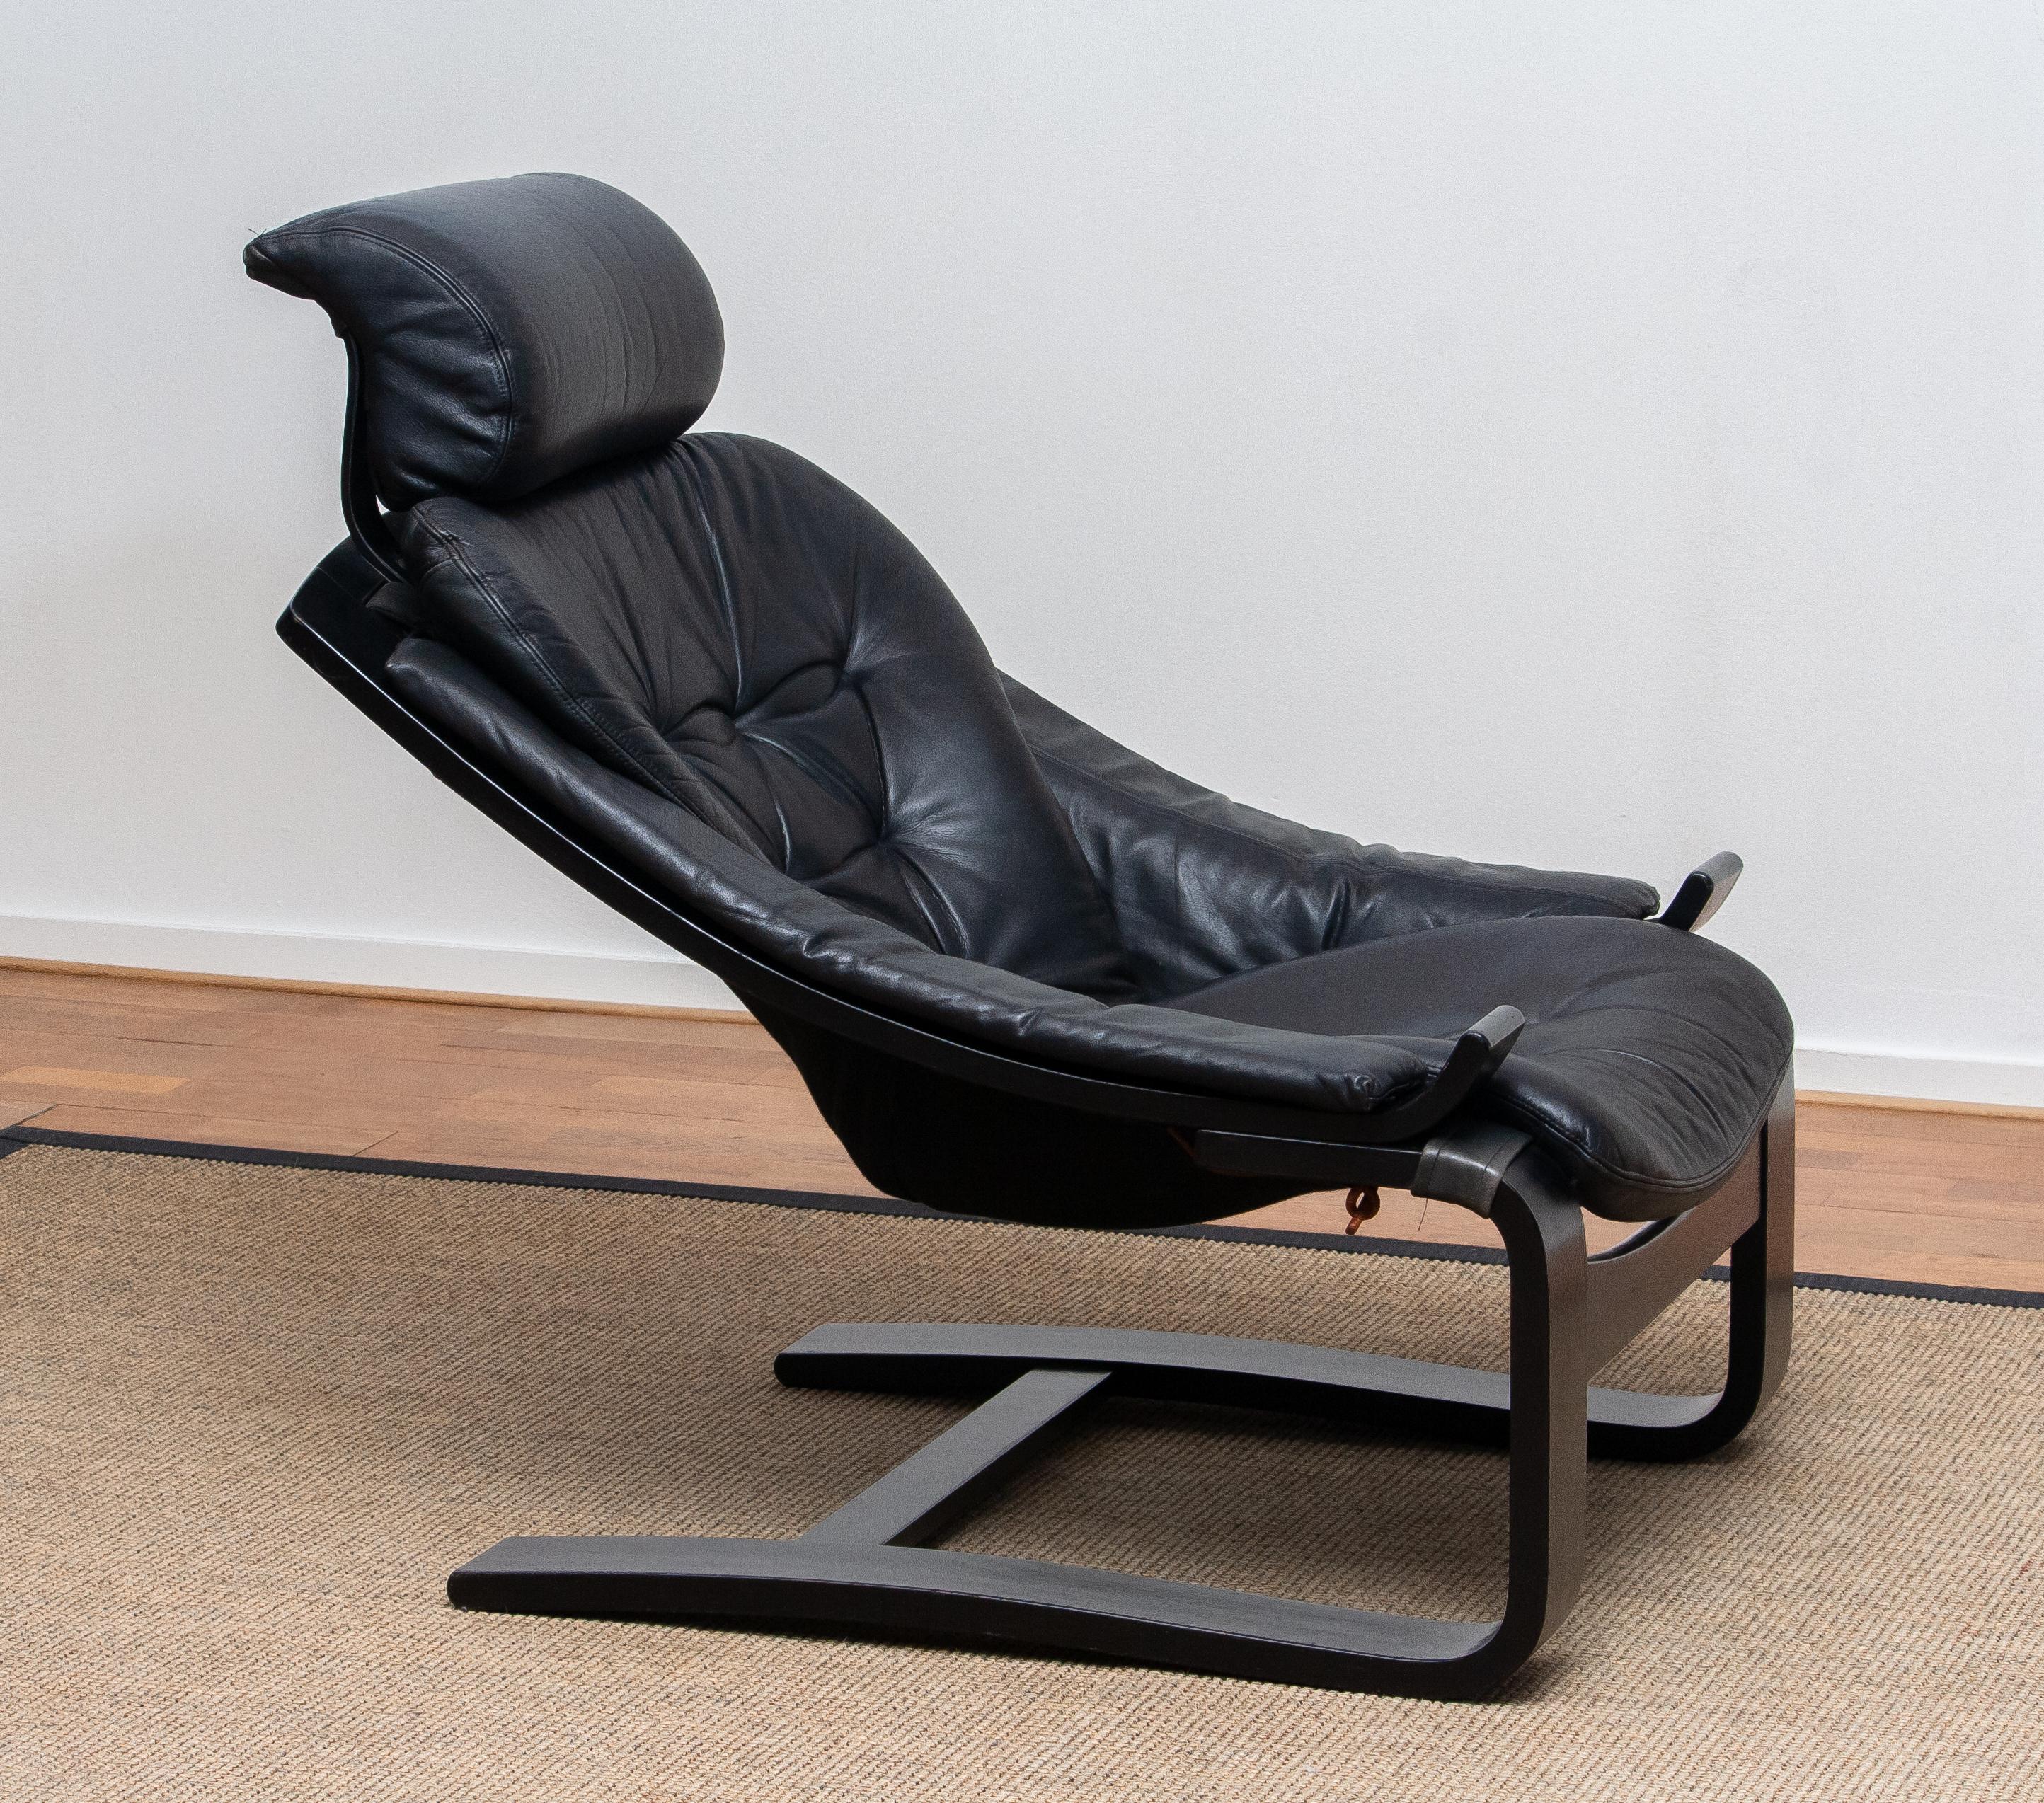 1970s, Black 'Kroken' Lounge Chair By Ake Fribytter for Nelo Sweden In Leather. 1